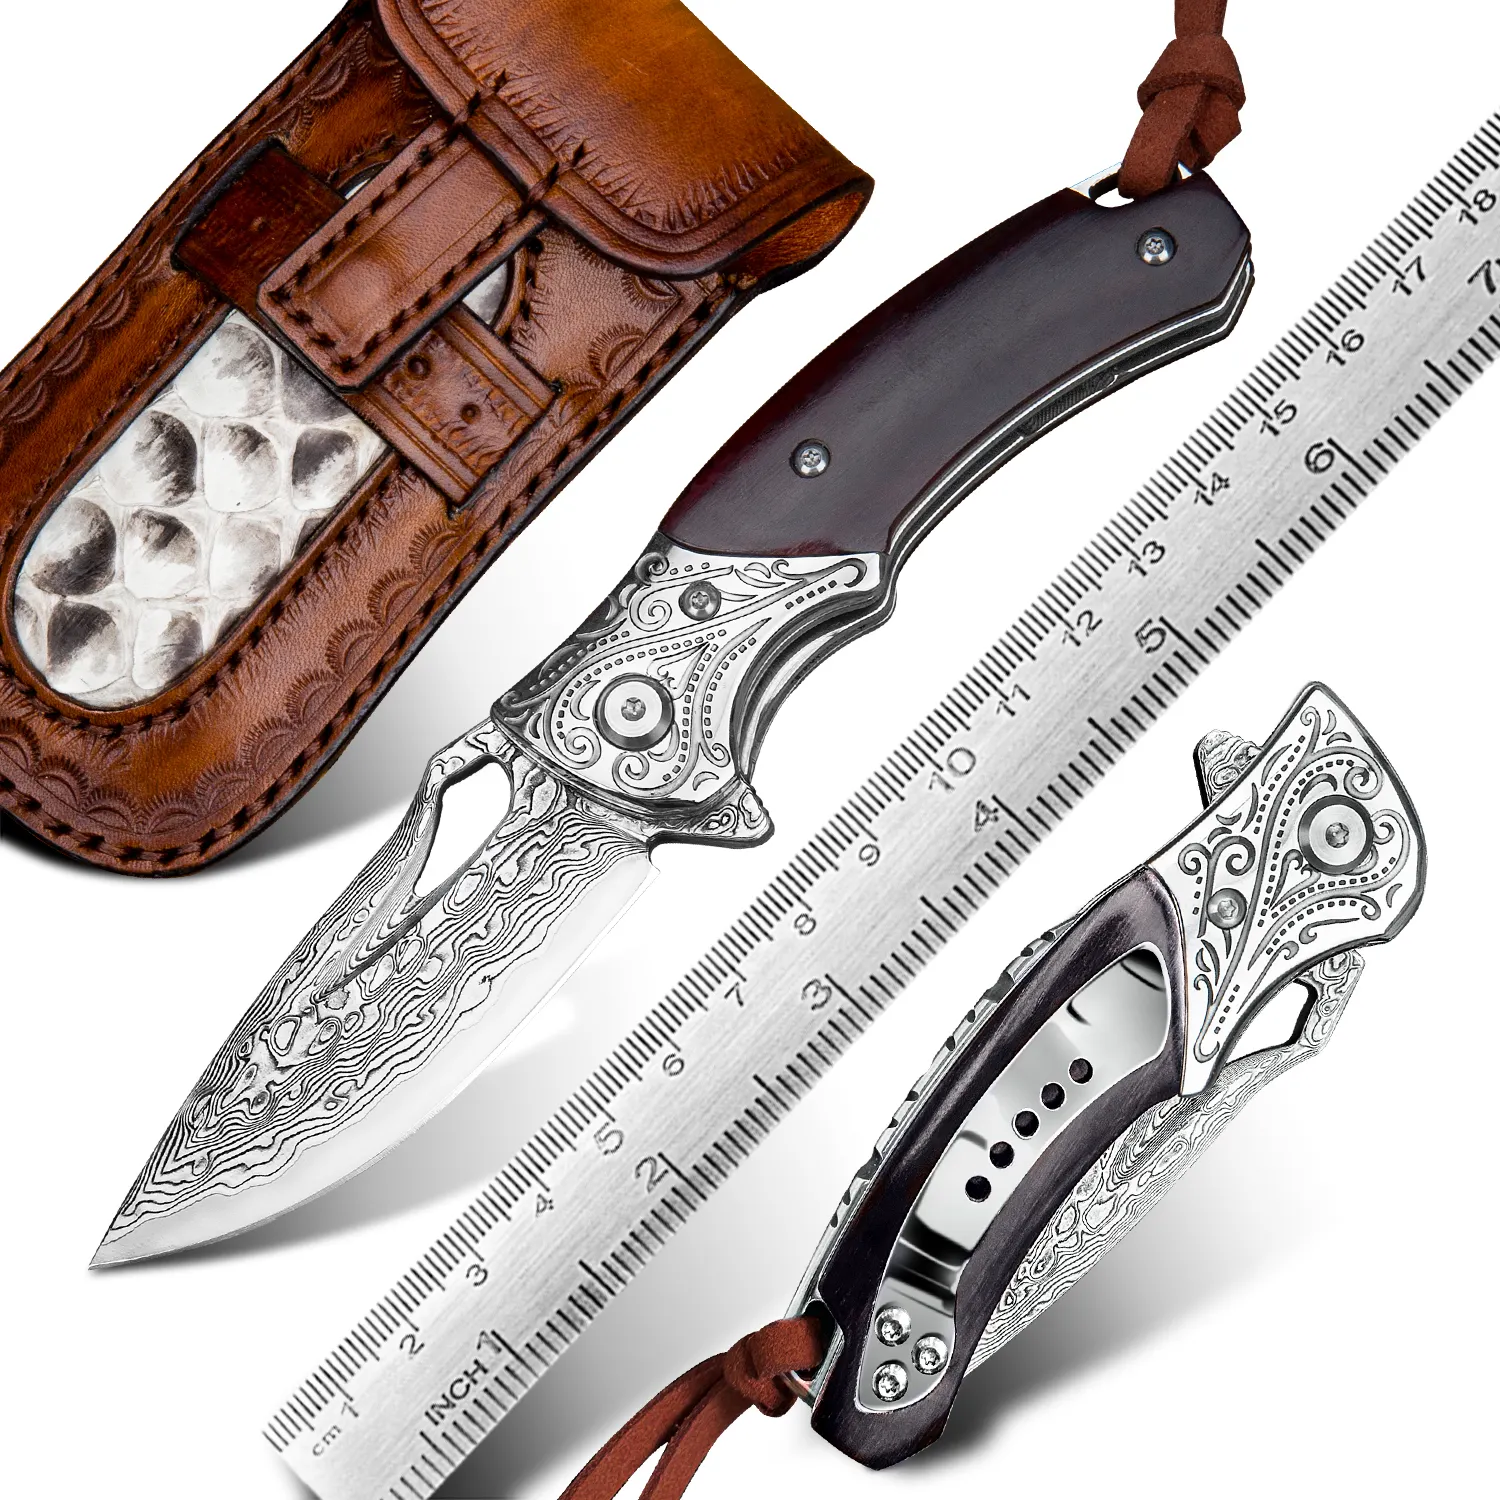 Handmade Outdoor Survival Hunting Camping Clip EDC Pocket Knives with Sheath Tactical Damascus Steel Folding Knife